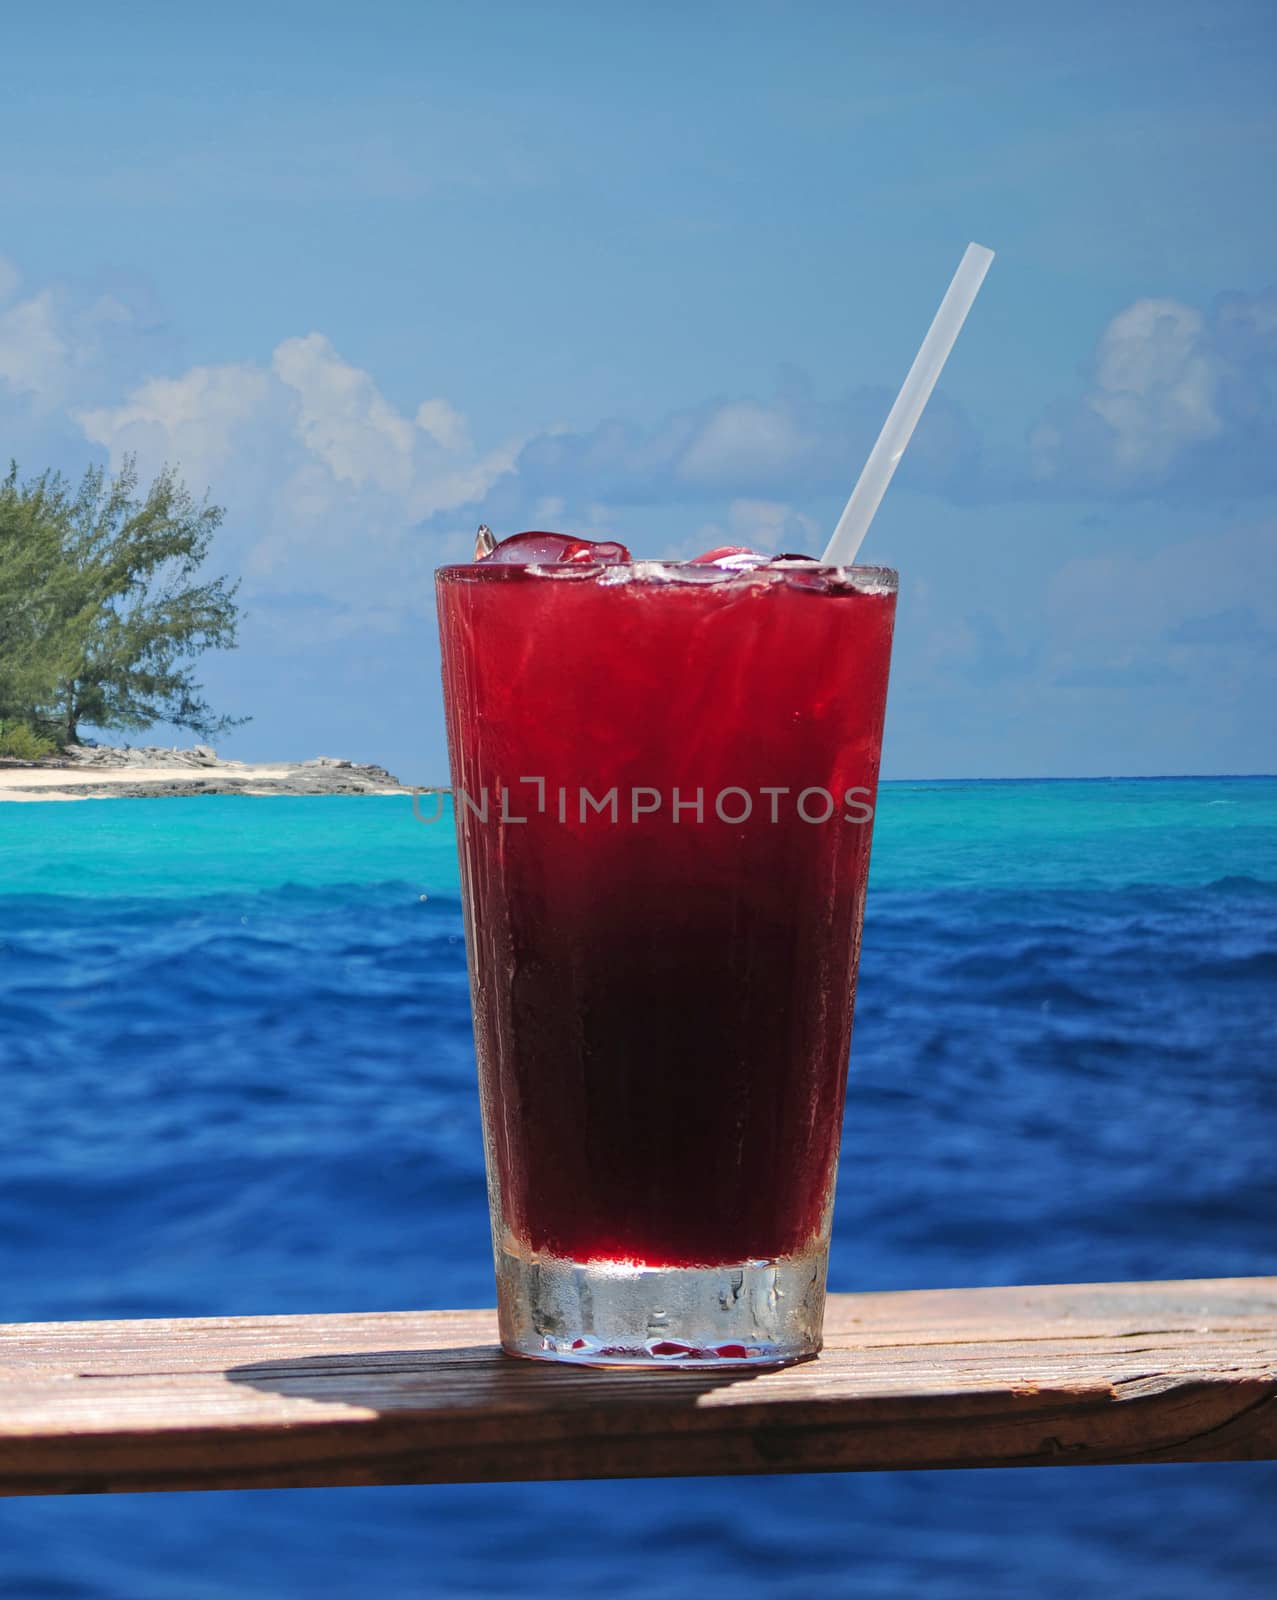 Rum punch or fruity drink in a tropical paradise with a turquoise ocean and clear blue water